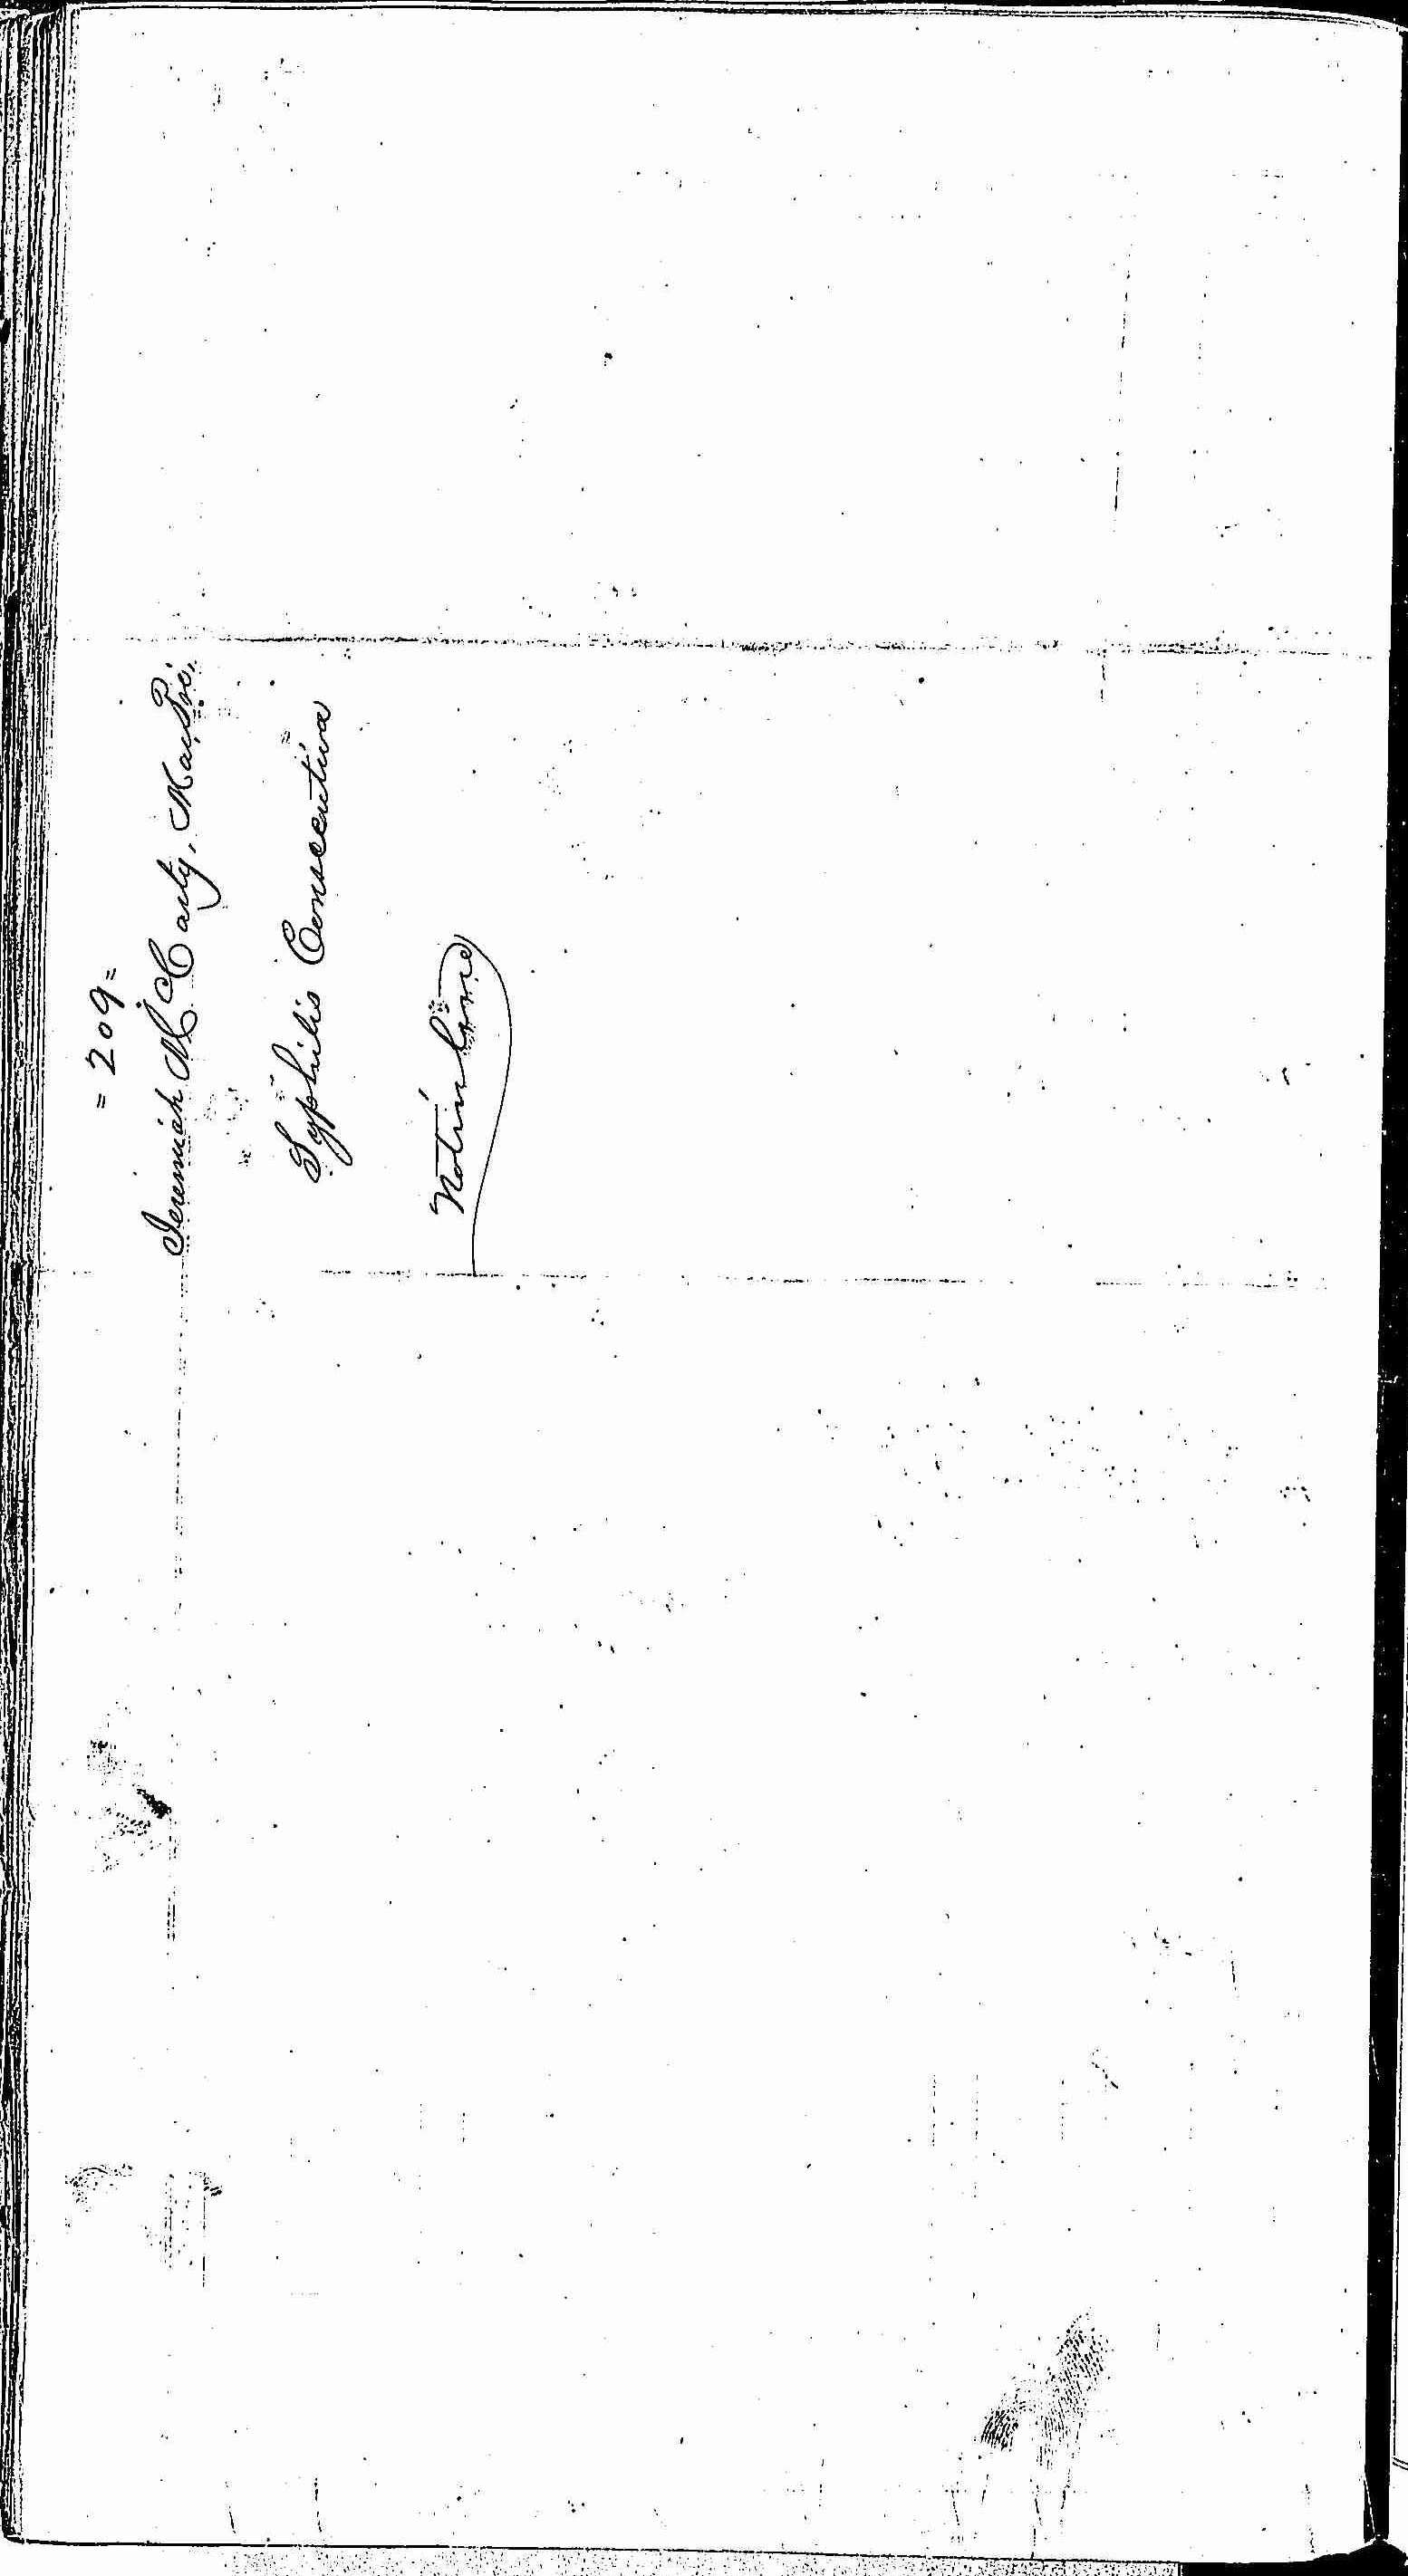 Entry for Jeremiah McCarty (page 2 of 2) in the log Hospital Tickets and Case Papers - Naval Hospital - Washington, D.C. - 1866-68